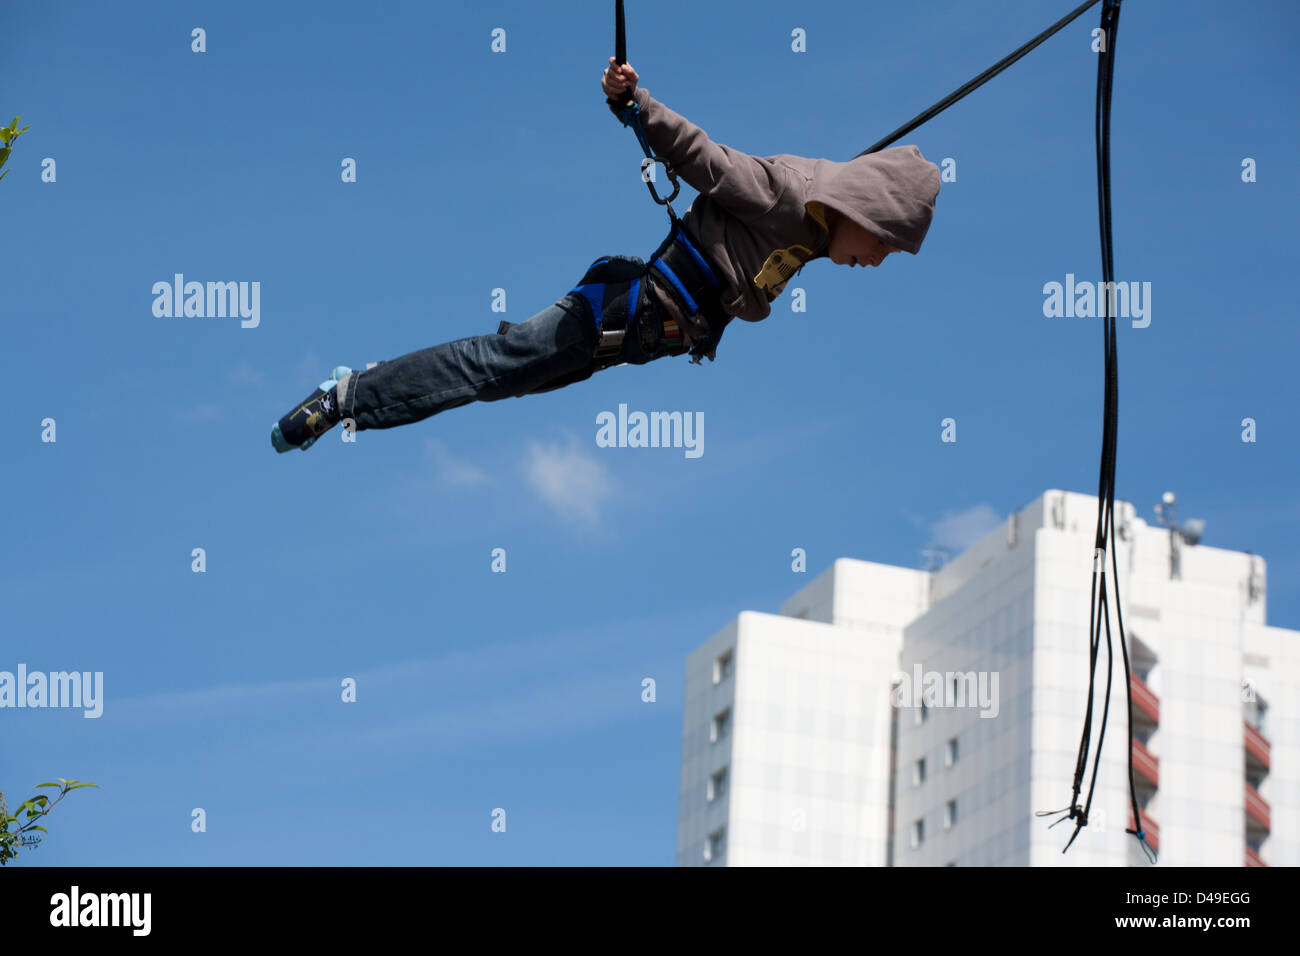 Berlin, Germany, boy floats in the air jumping on the trampoline Stock Photo